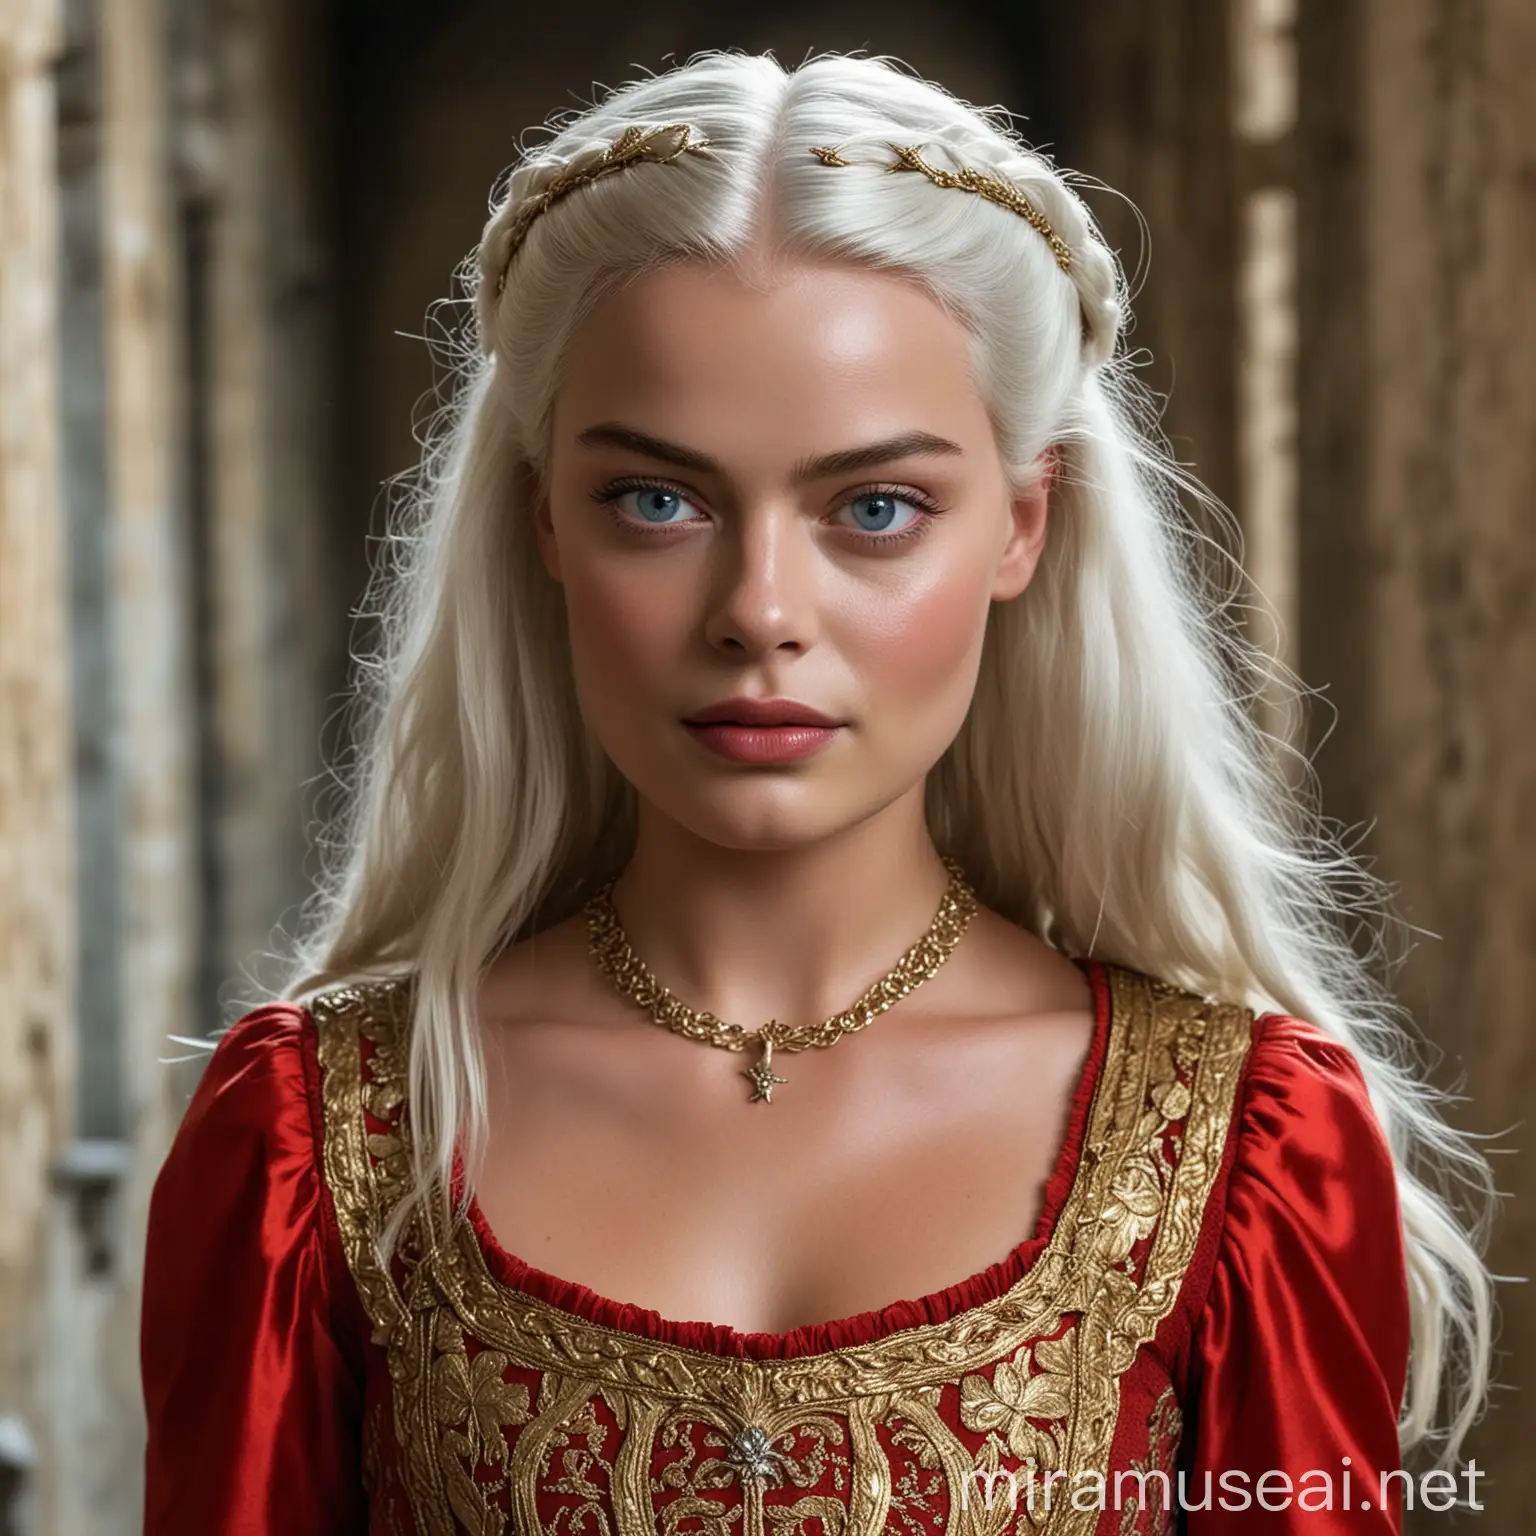 Margot Robbie as Young Targaryen Princess in Red and Gold Dress